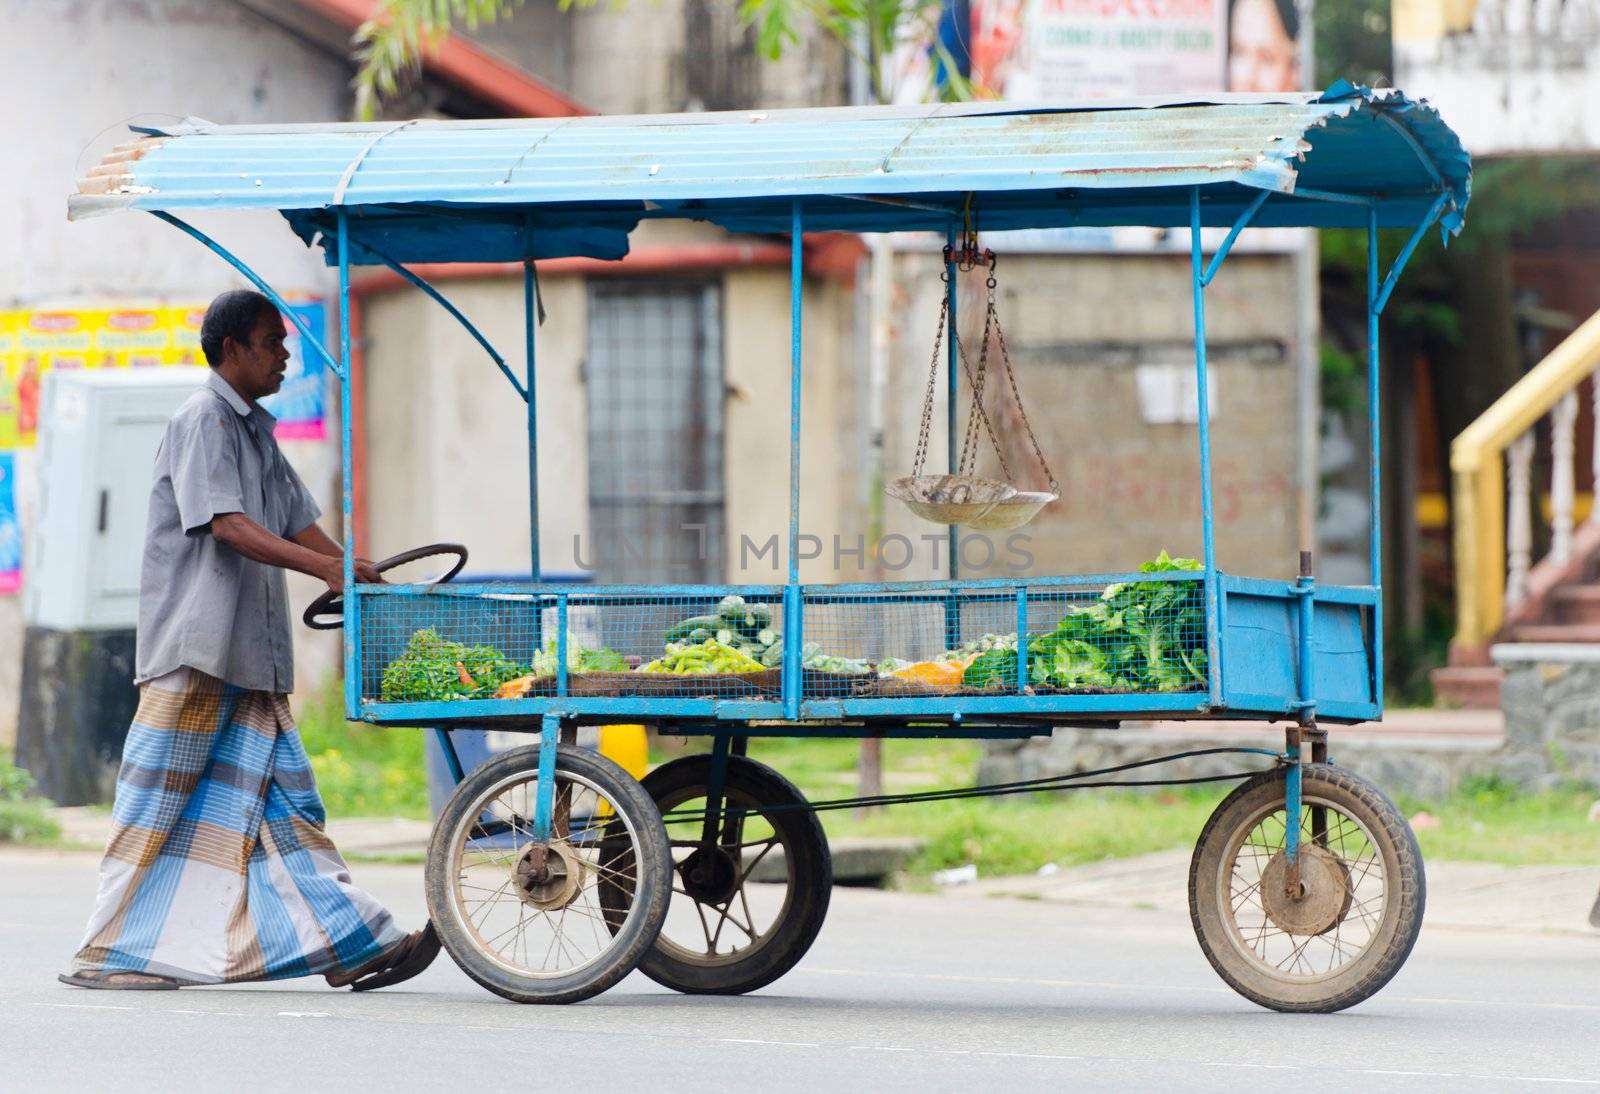 Colombo, Sri Lanka - December 14, 2011: Traditional Asian small street trader with his mobile stall of vegetables